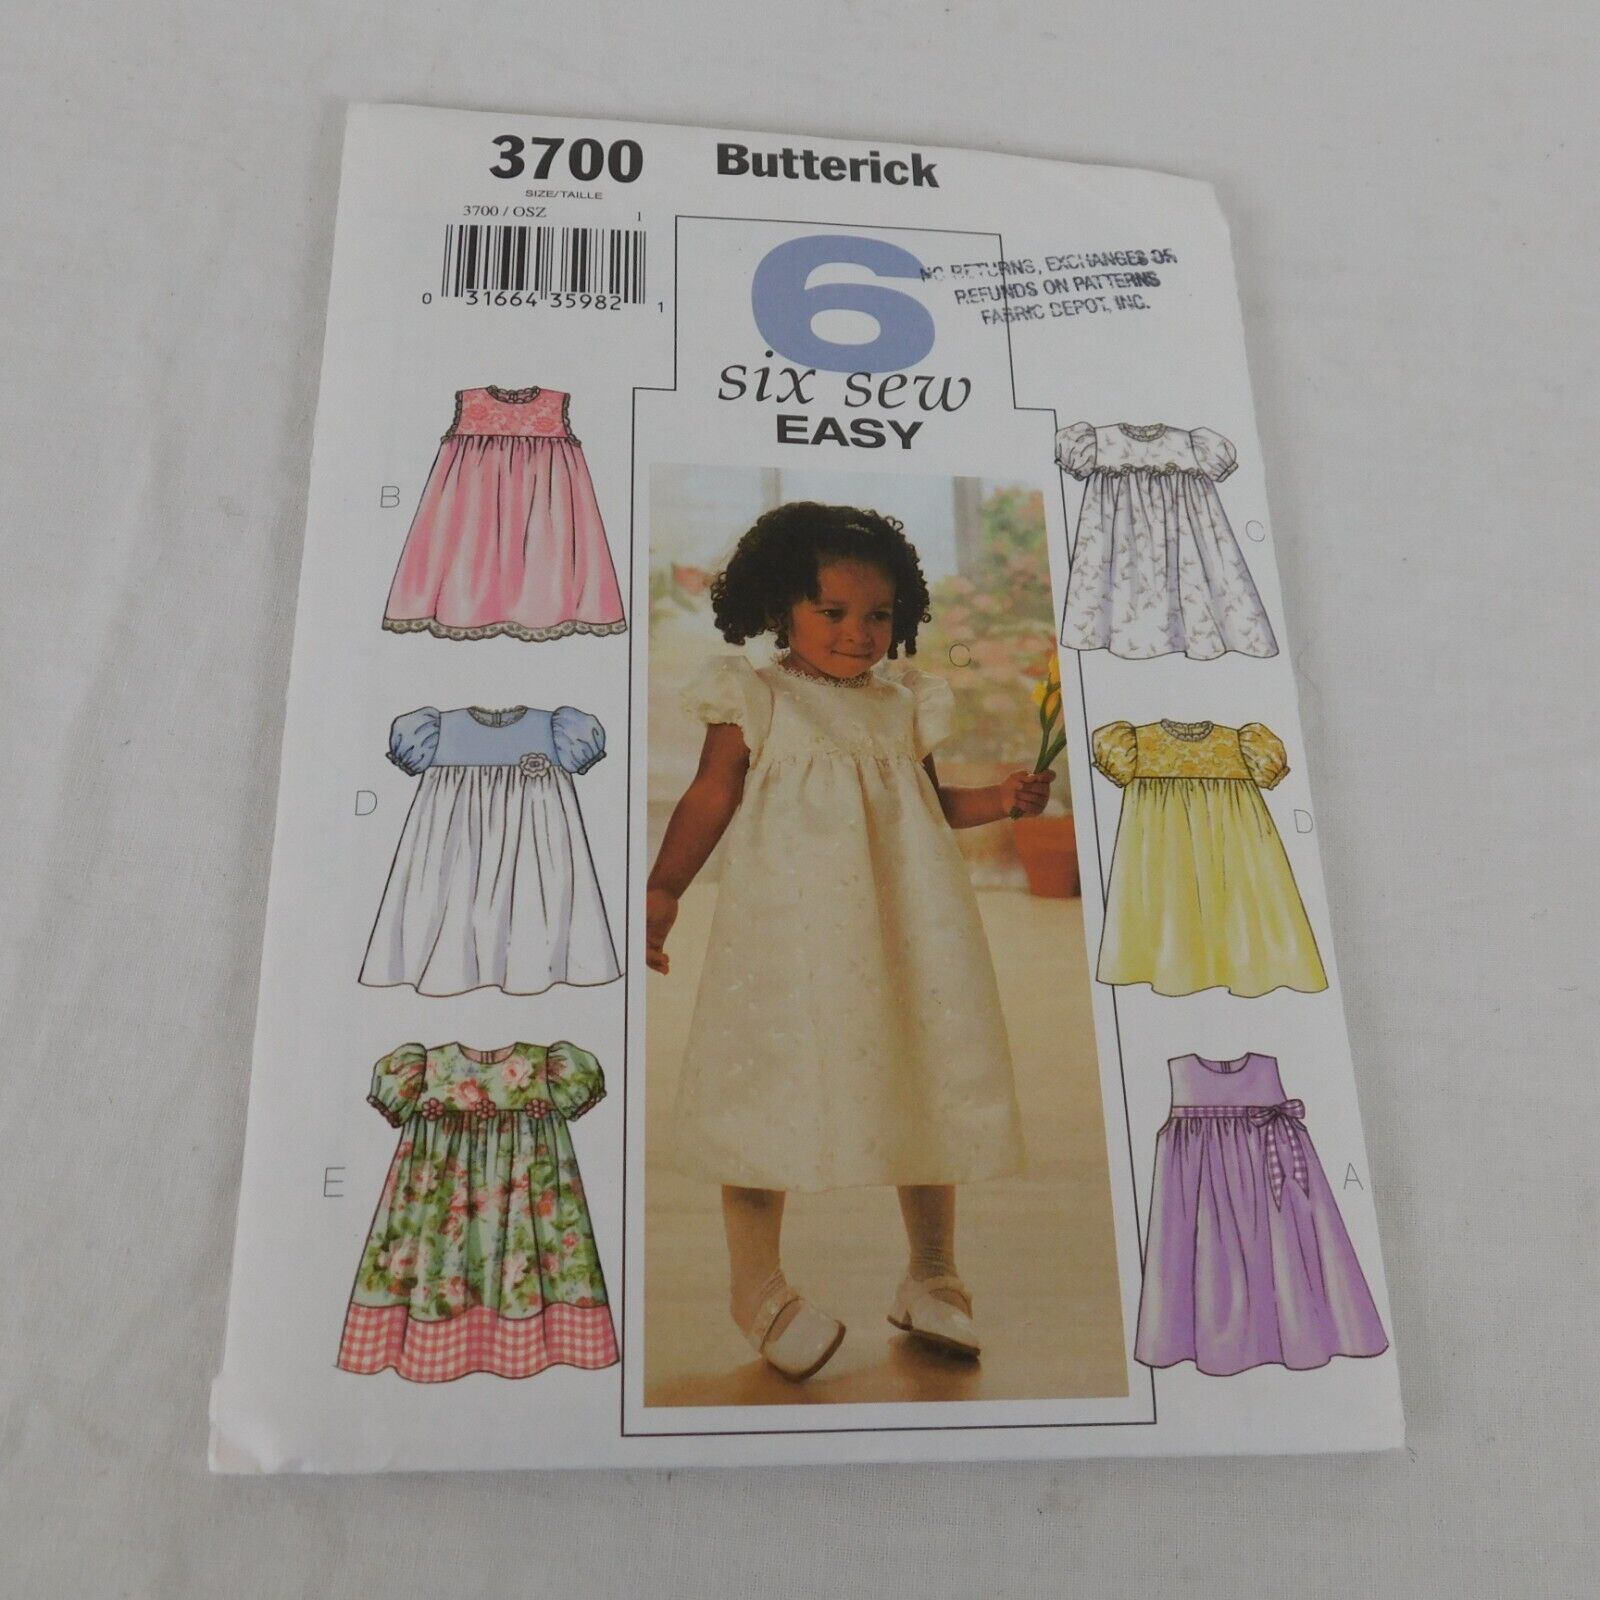 Butterick 3700 Sewing Pattern Girls Toddler Party Dress Six Sew Easy UC Sz 1-4 - $7.85